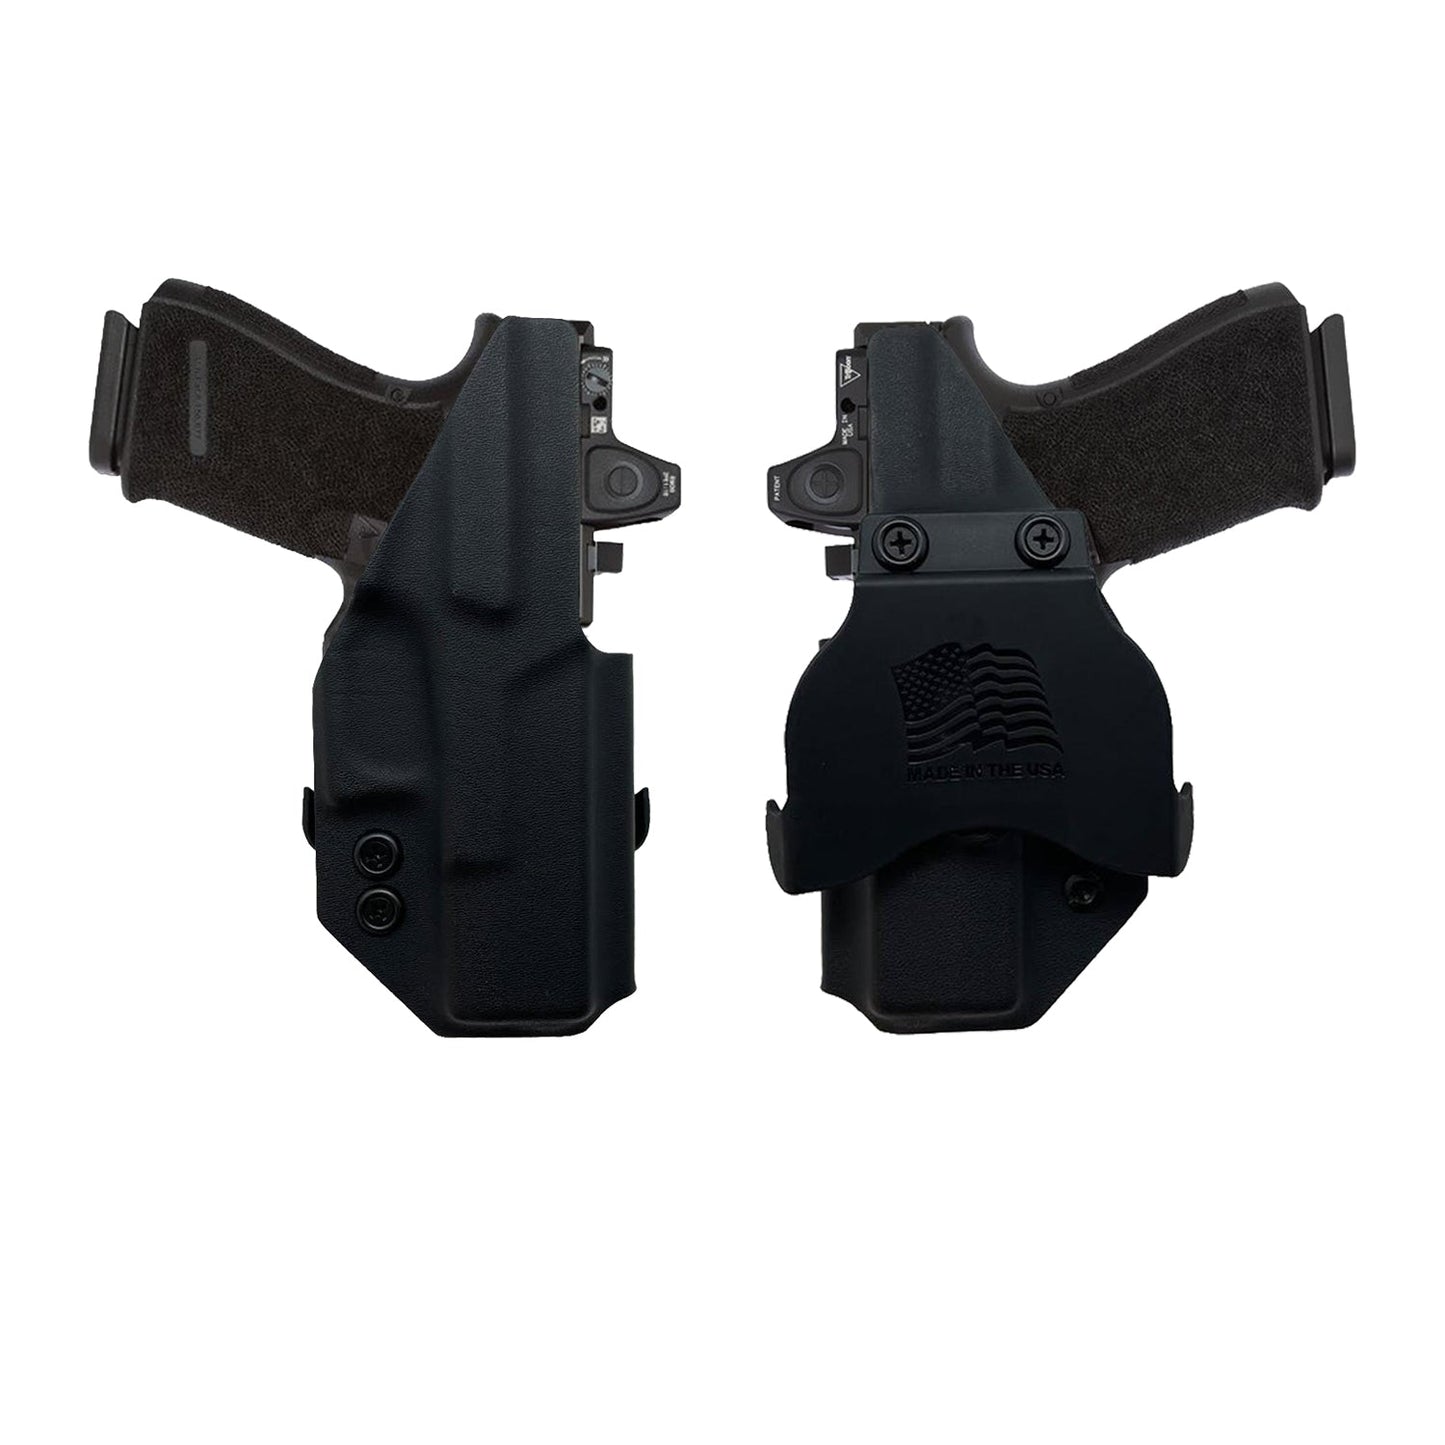 SIG P365/ P365X With XSC Light OWB (Outside The Waistband Holster)